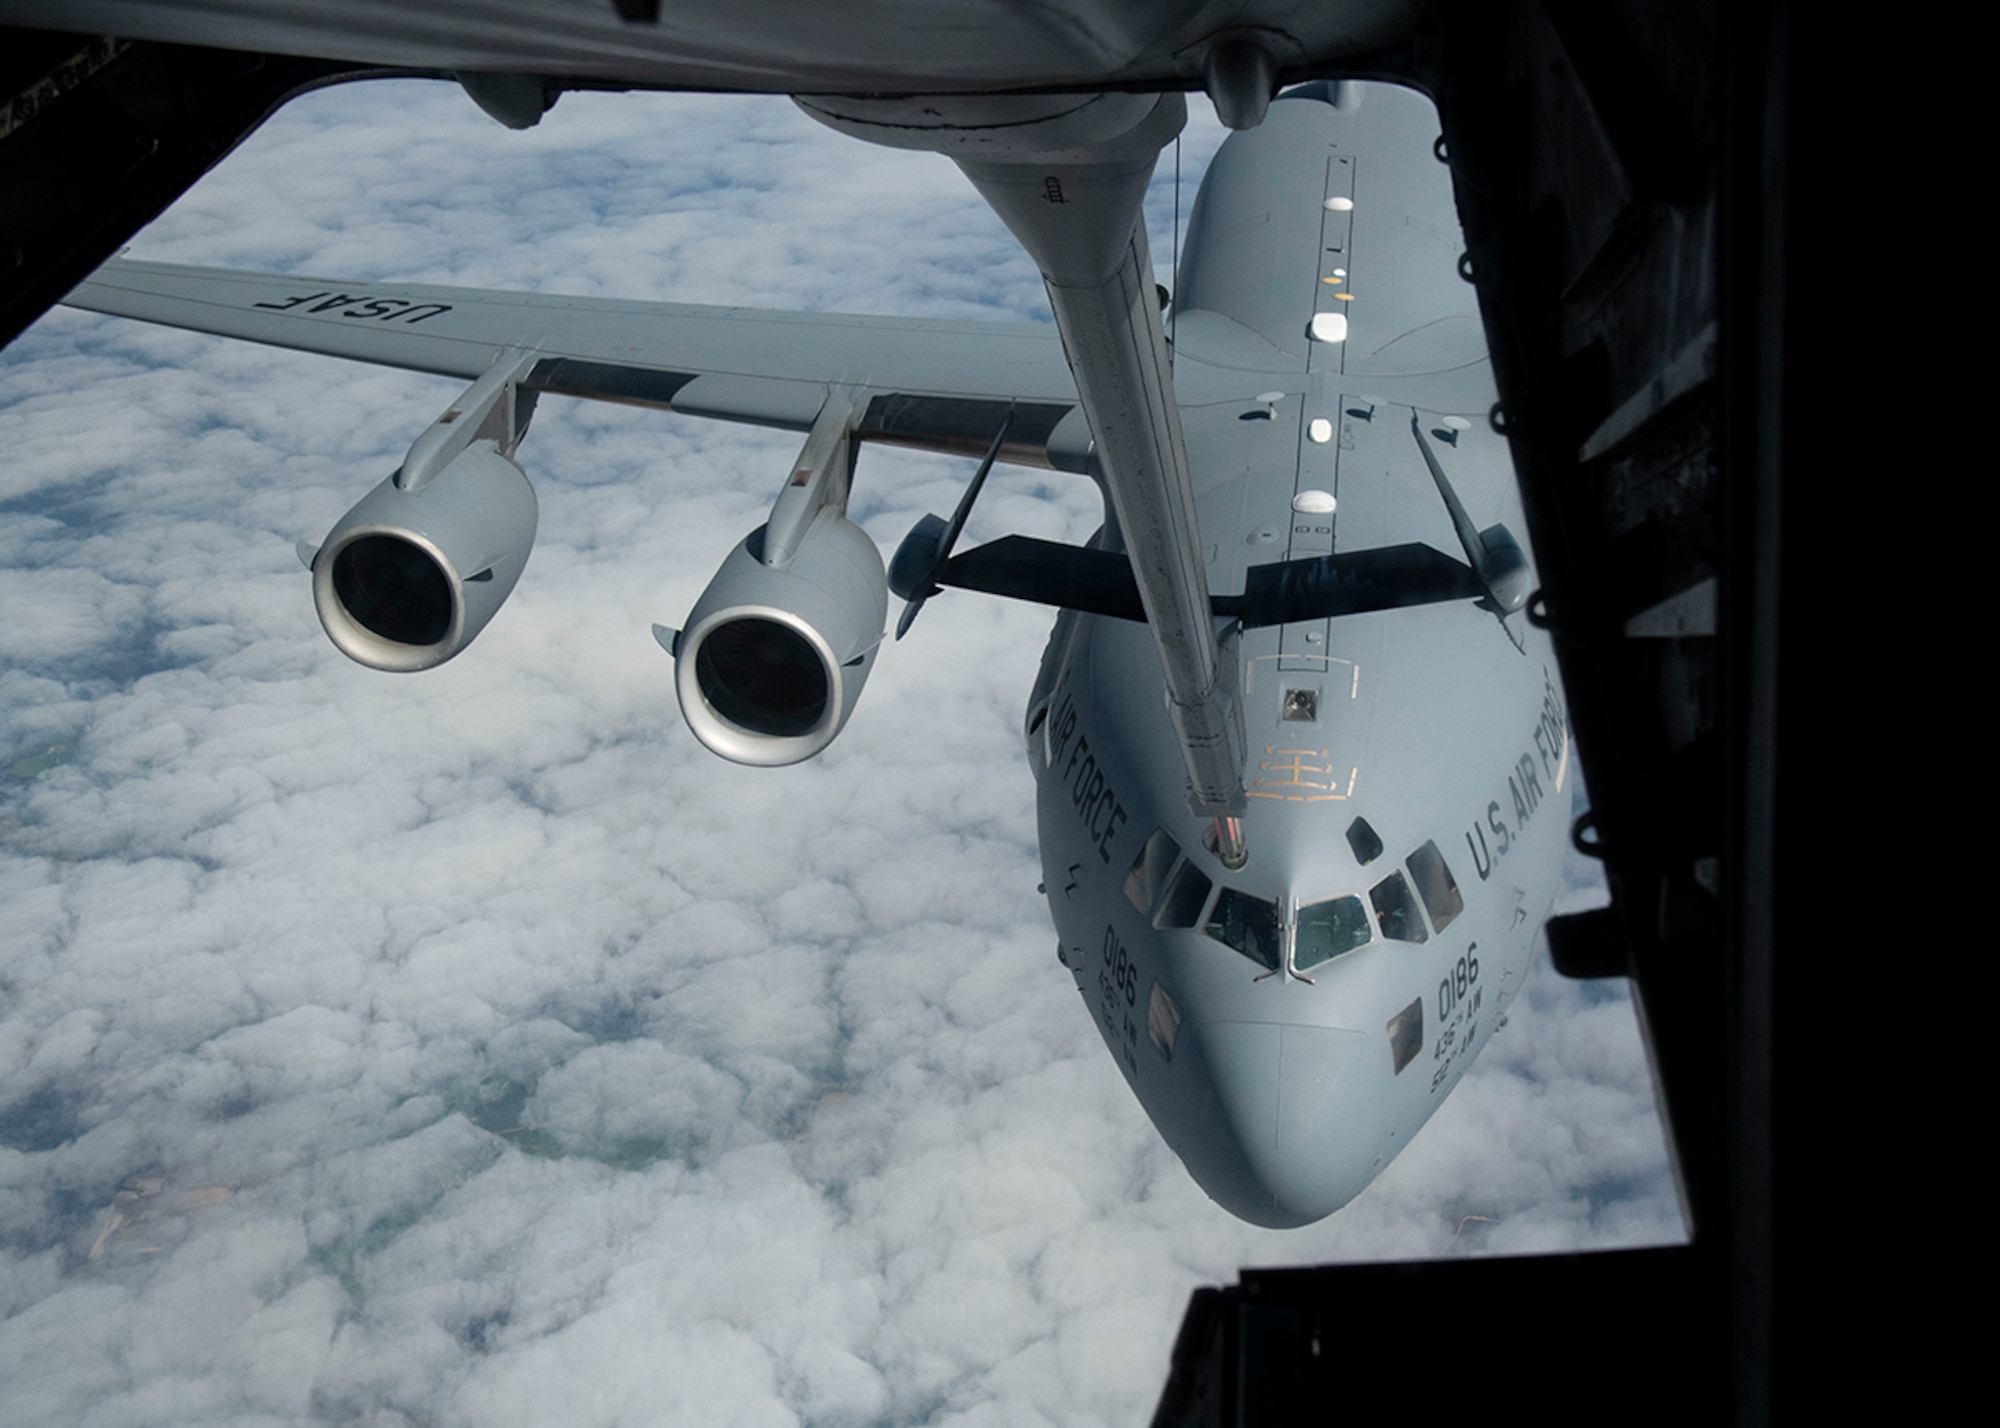 A C-17 Globemaster III from the 436th Airlift Squadron, Dover Air Force Base, Del., prepares to receive fuel from a KC-10 Extender from the 305th Air Mobility Wing, Joint Base McGuire-Dix-Lakehurst, N.J., March 7, 2019, during Exercise Jersey Devil 19. Aircraft from Dover AFB and Joint Base MDL participated in the exercise to include the C-5M Supergalaxy, KC-10 Extender and C-17 Globemaster III. (U.S. Air Force photo by Airman 1st Class Zoe M. Wockenfuss)